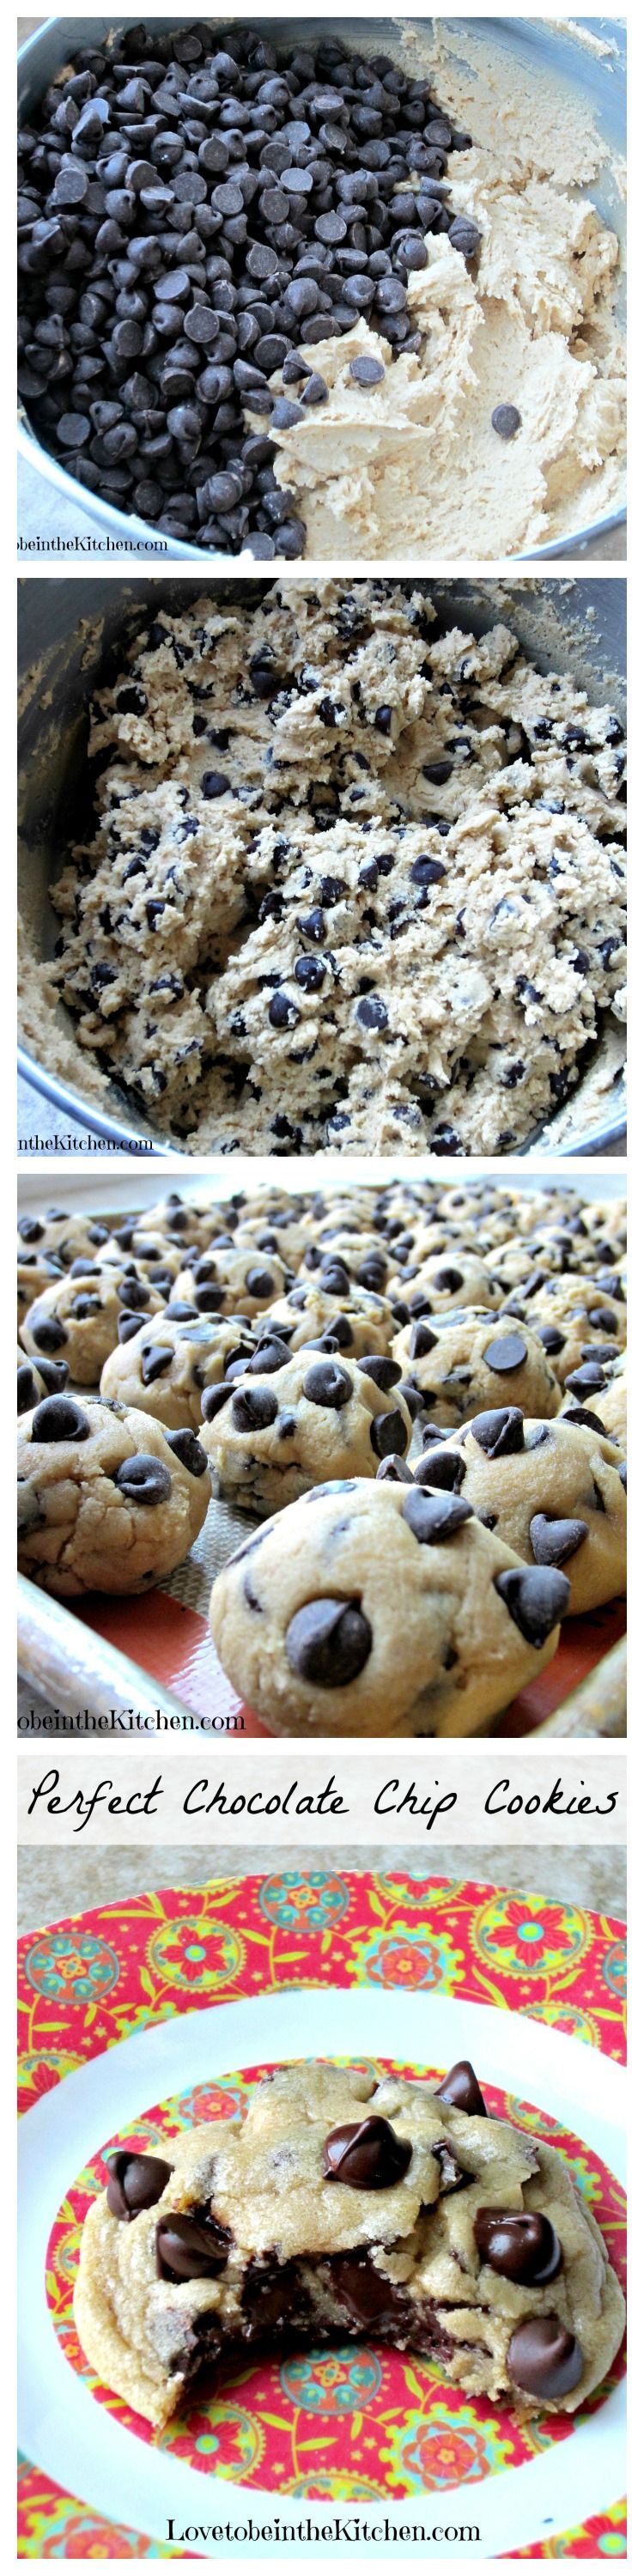 Perfect Chocolate Chip Cookies- 5th most popular recipe in 2014 on Love to be in the Kitchen! This is my #1 favorite recipe I have